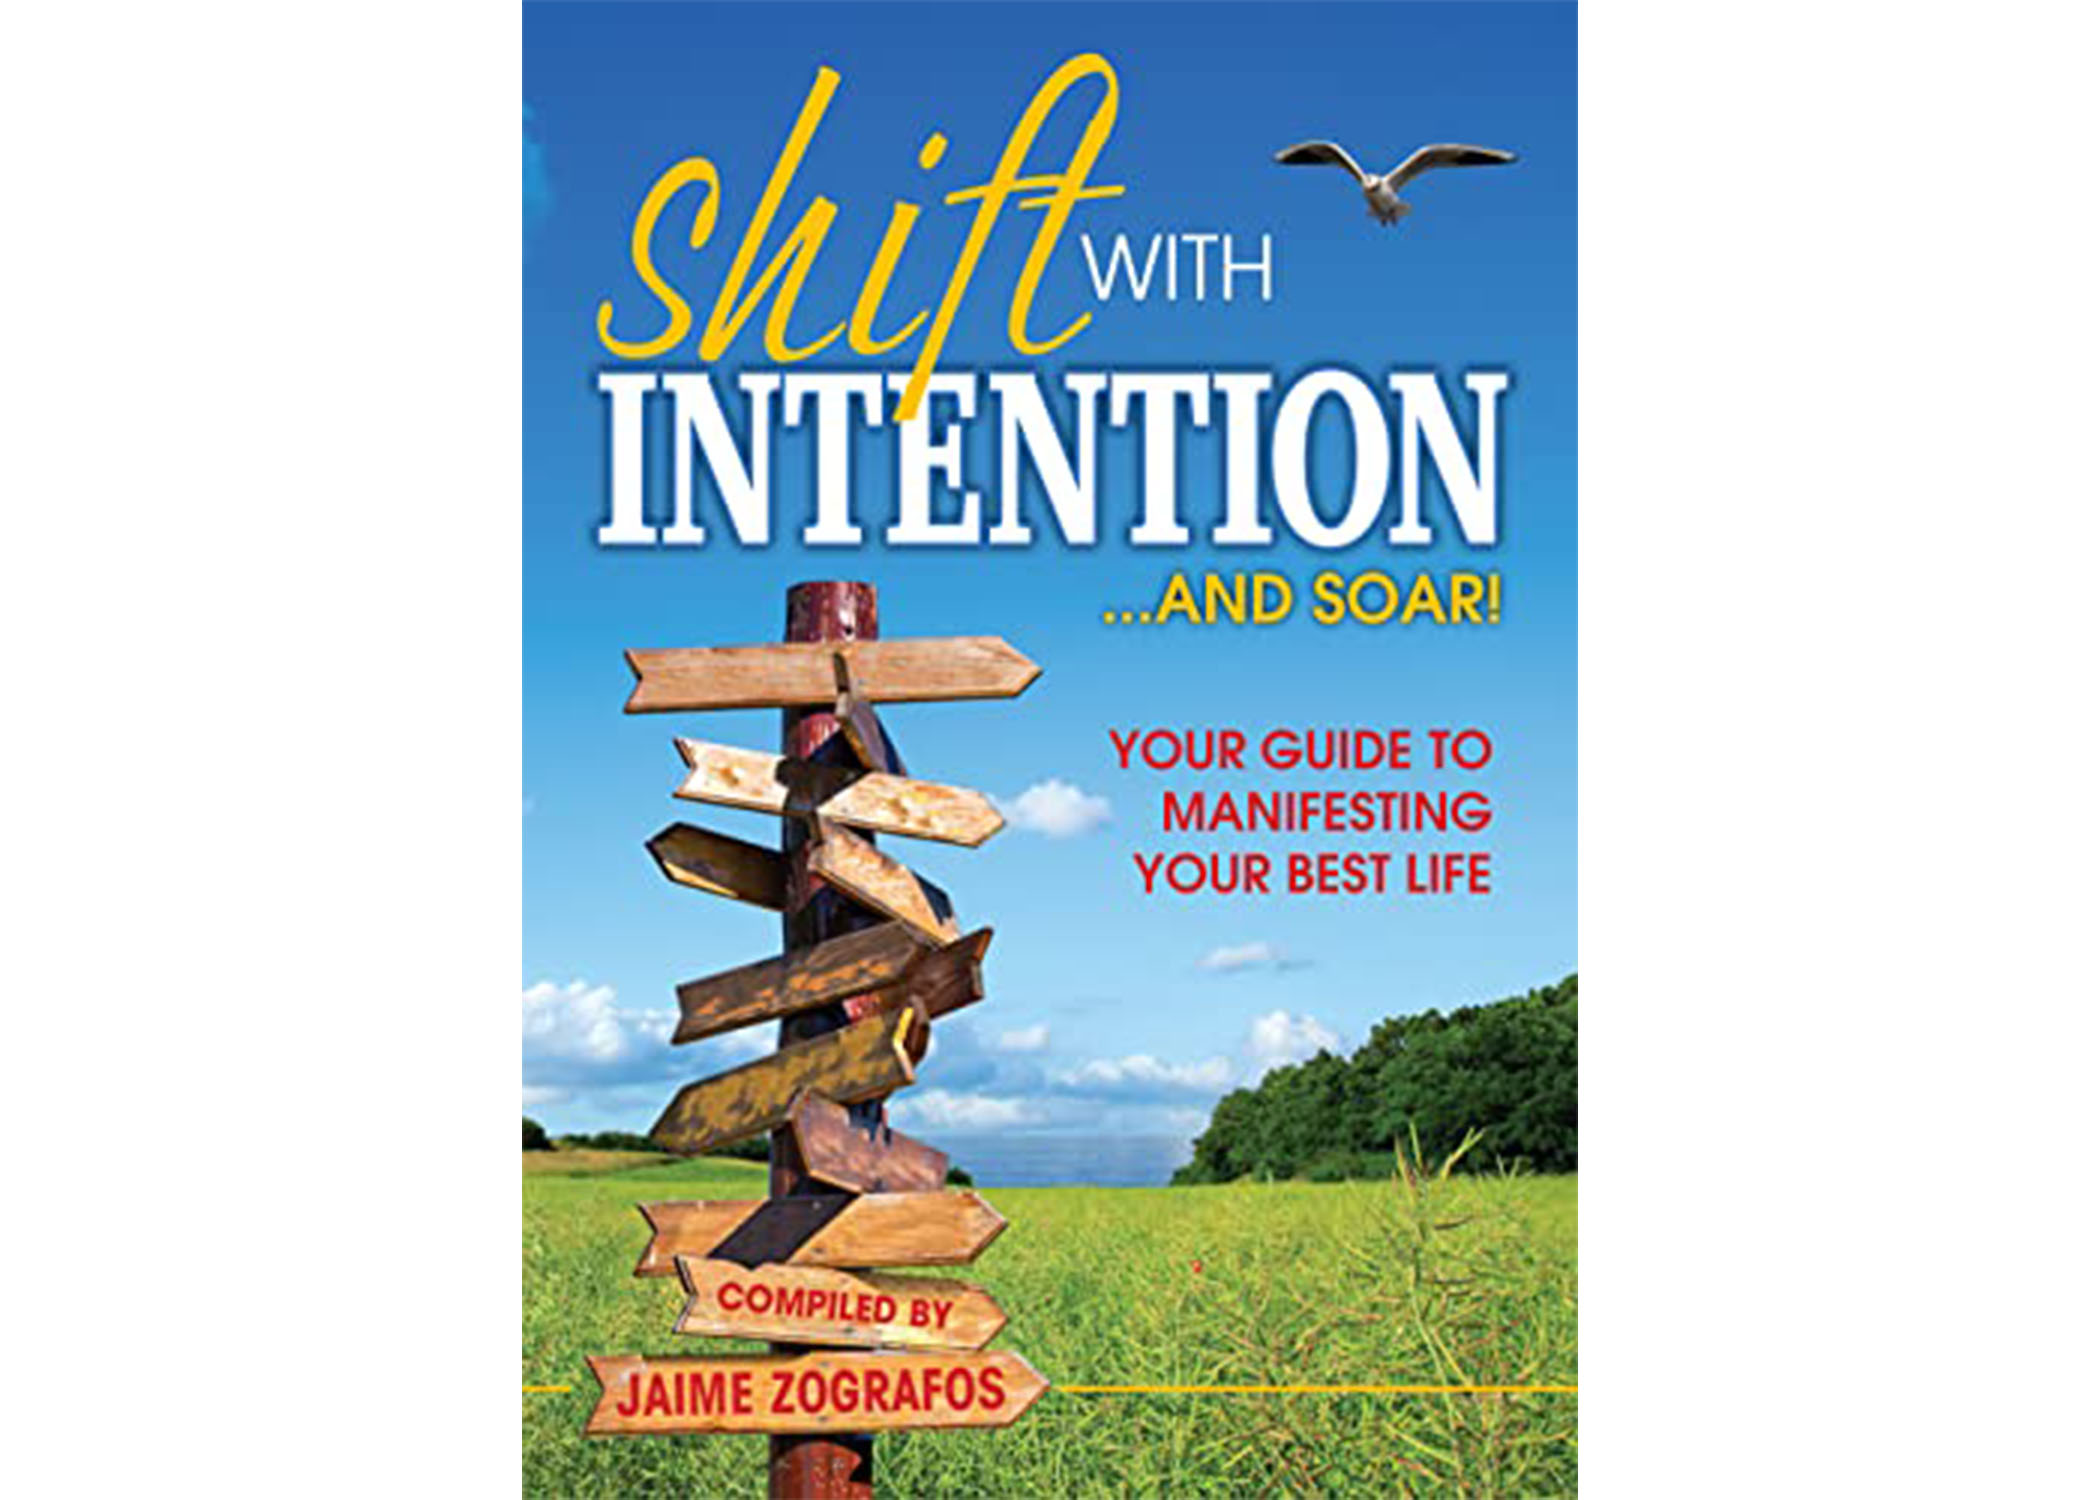 Shift with Intention.